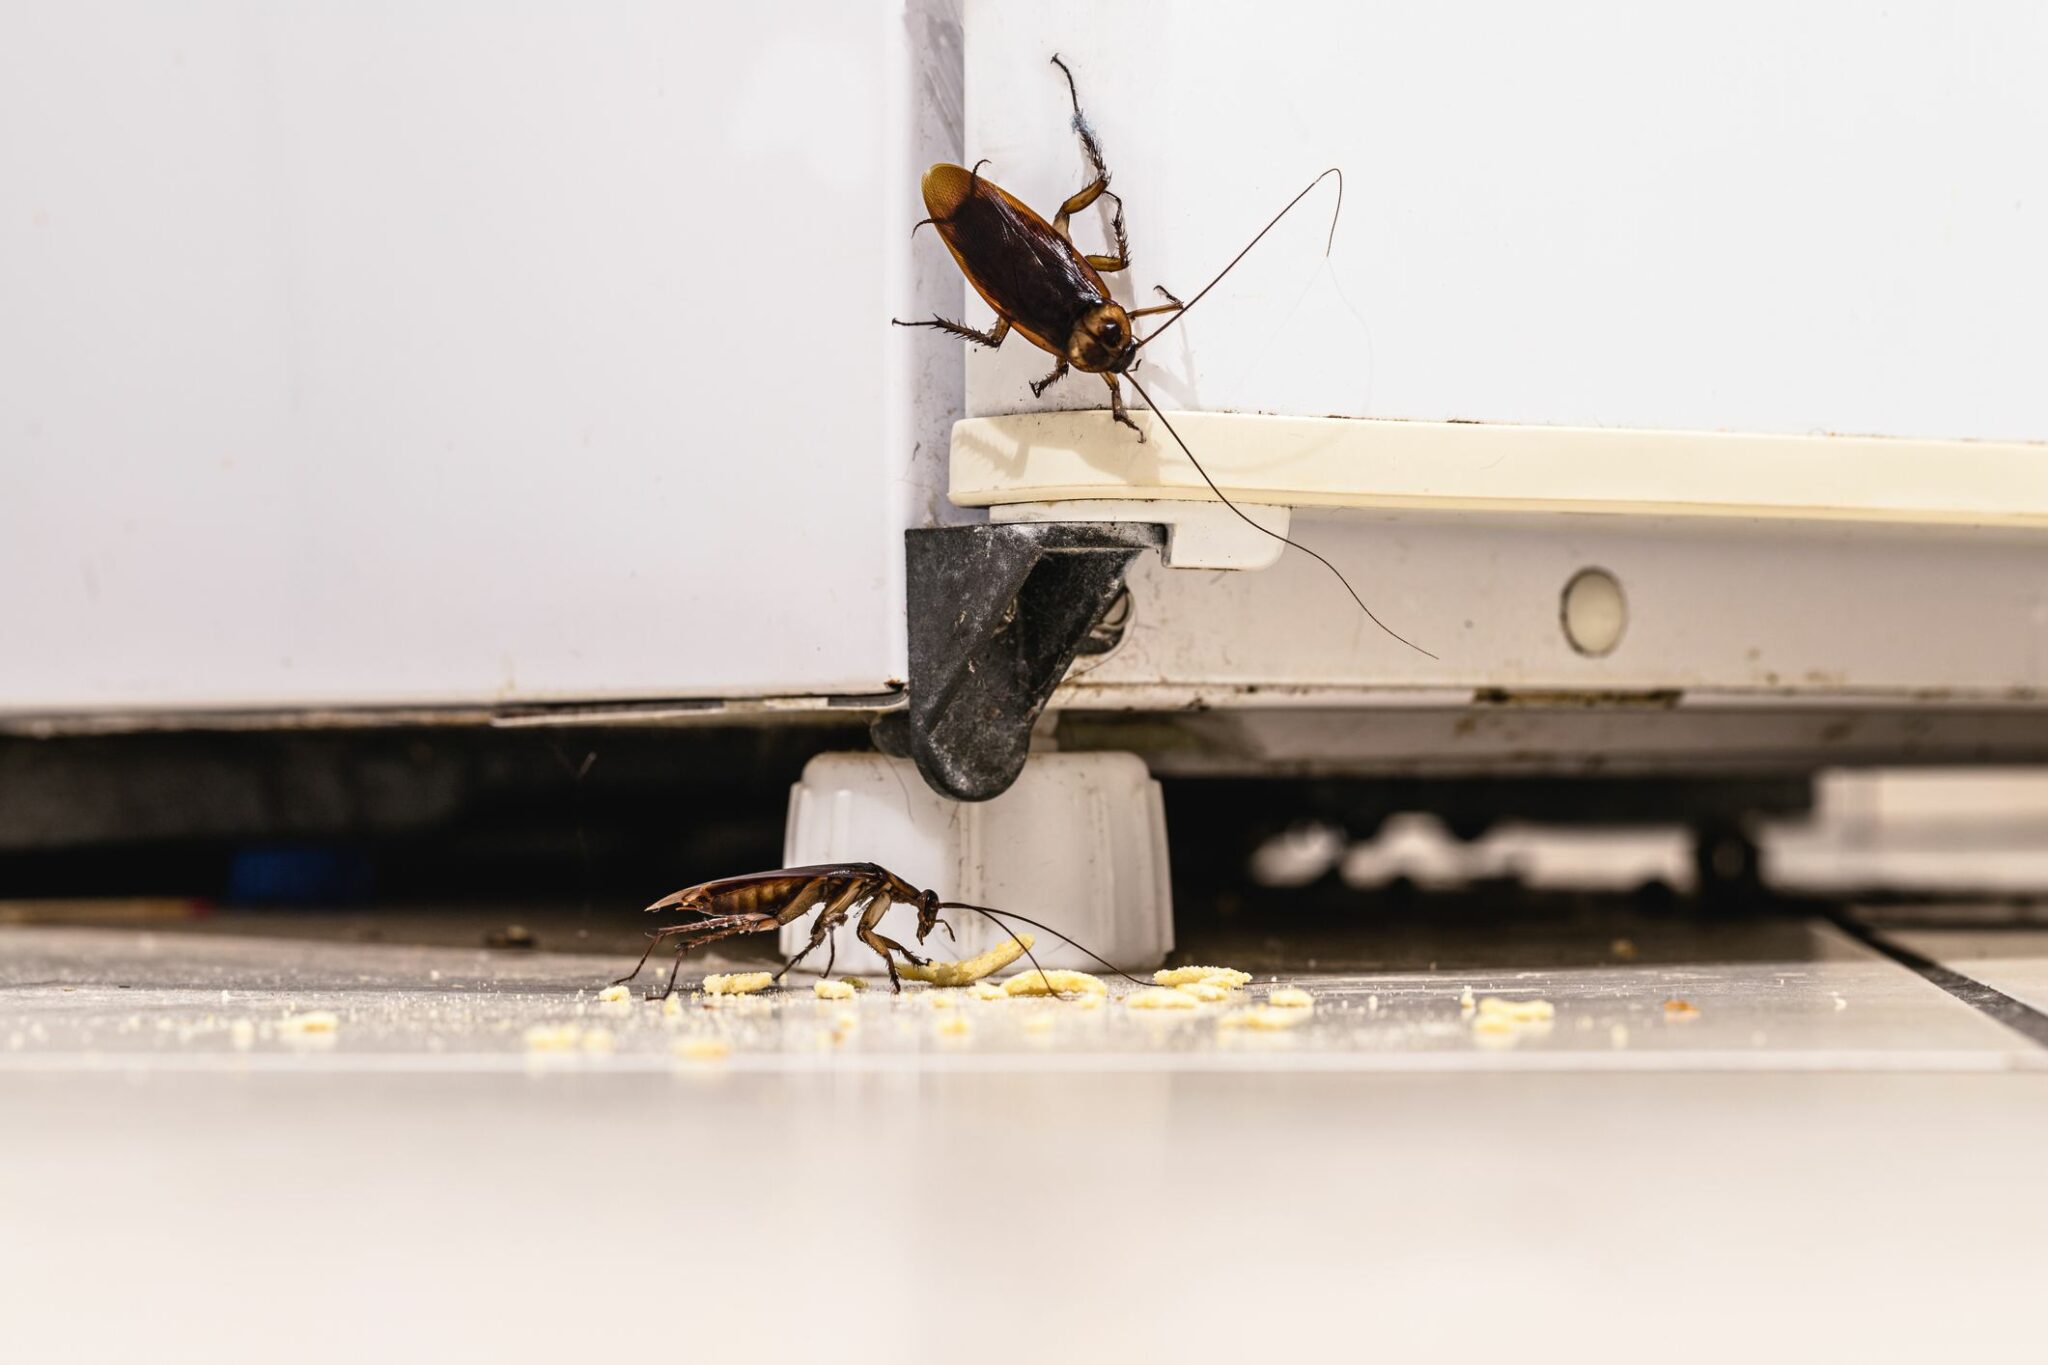 Alt text: Two large brown cockroaches crawl on and around a white refrigerator, eating food crumbs on the floor.